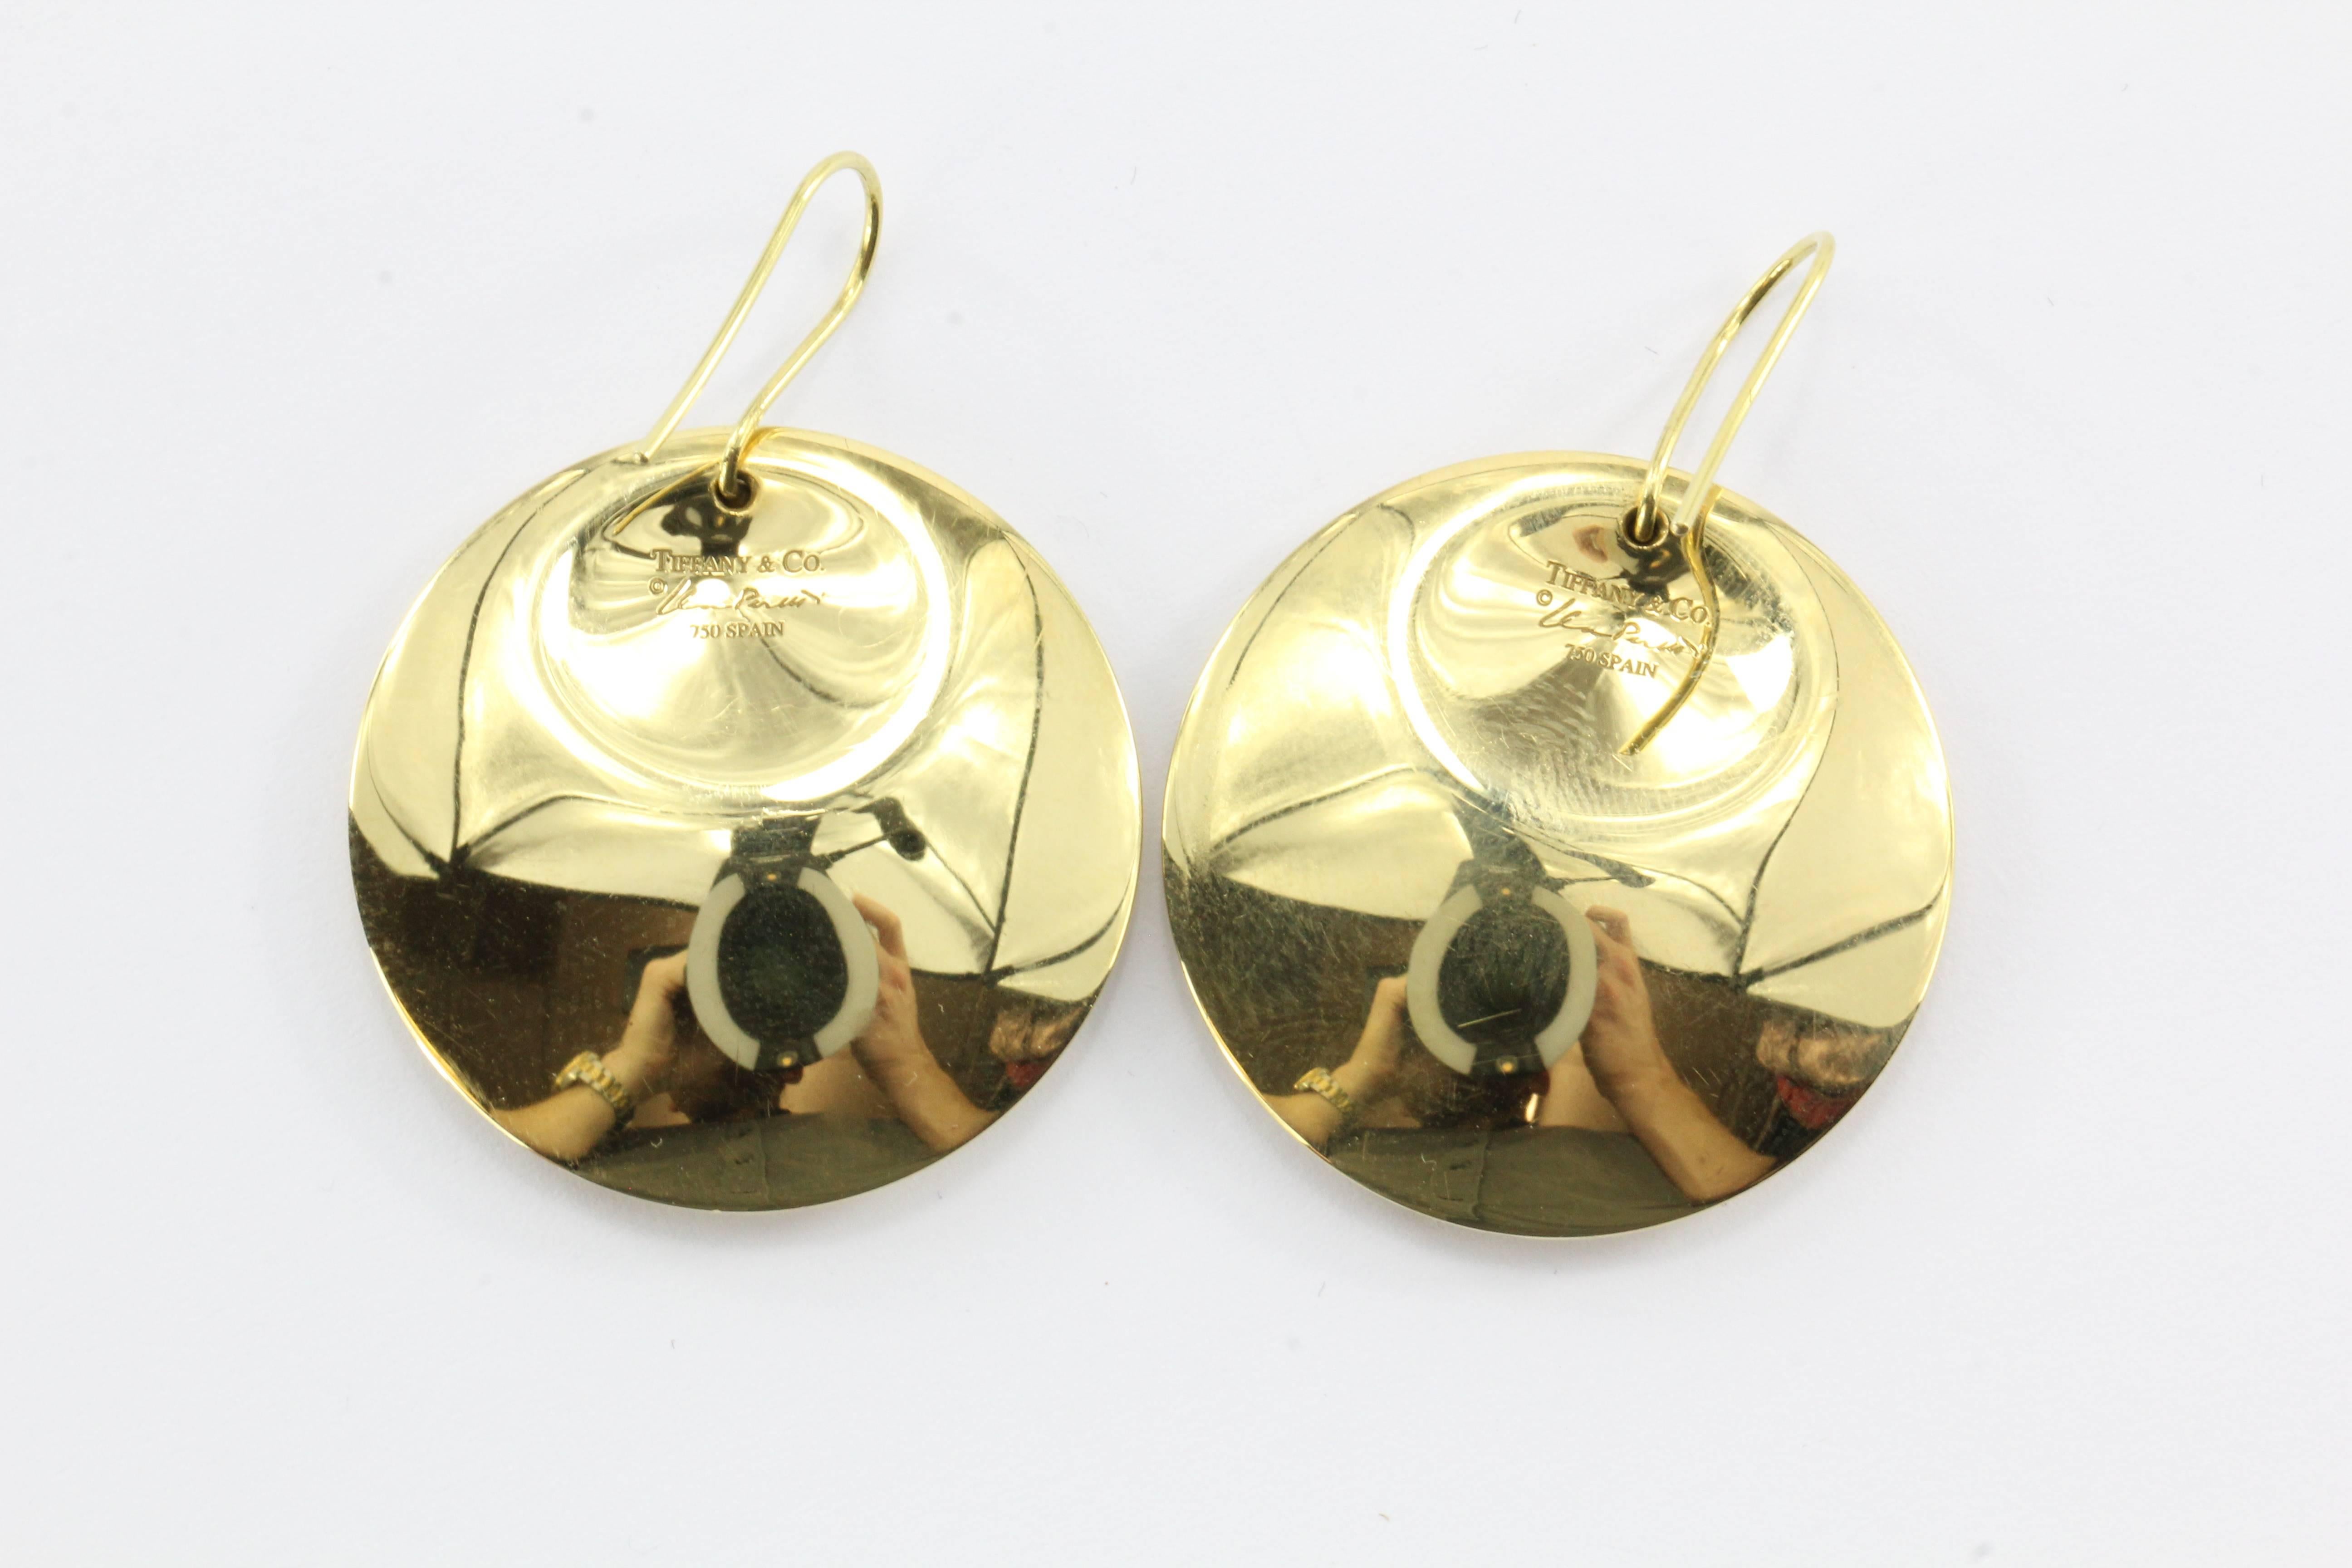 Tiffany & Co 18K Gold Elsa Peretti Large Full Moon Disk Earrings. The earrings are in excellent used estate condition and ready to wear. They come with their original case and box. They are signed 